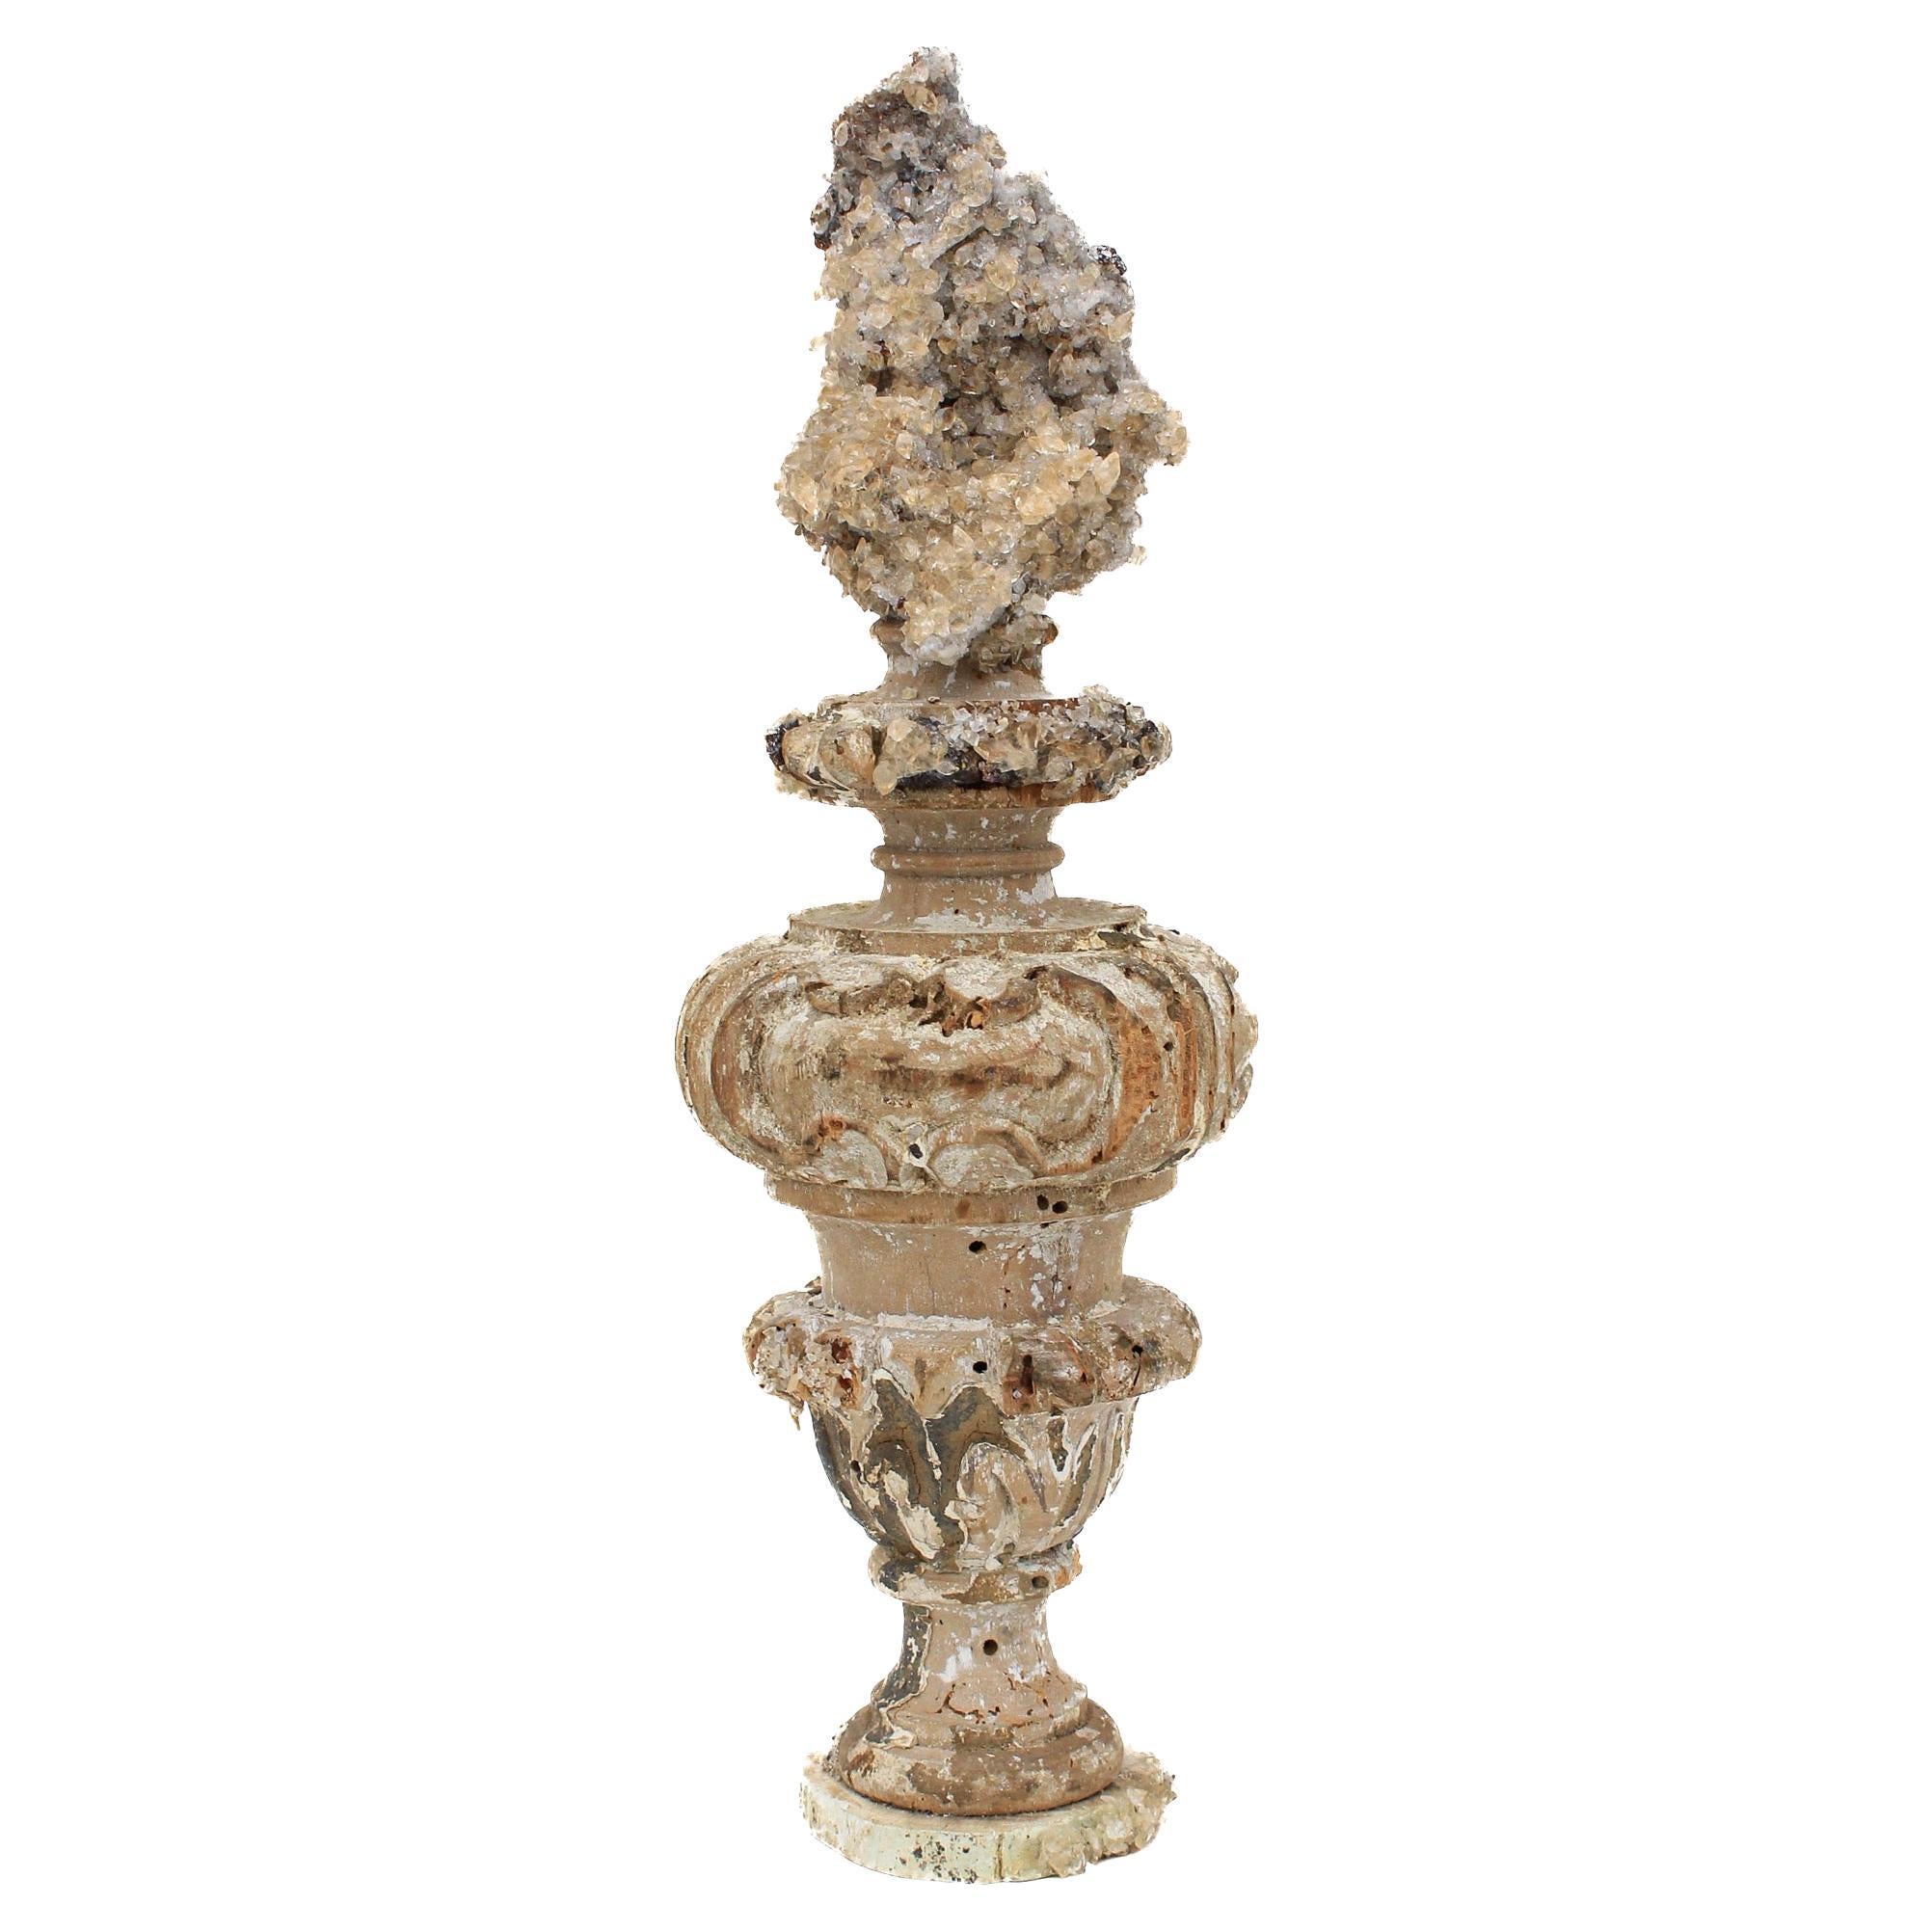 17th Century 'Florence Fragment' Vase with Calcite Crystals in Matrix